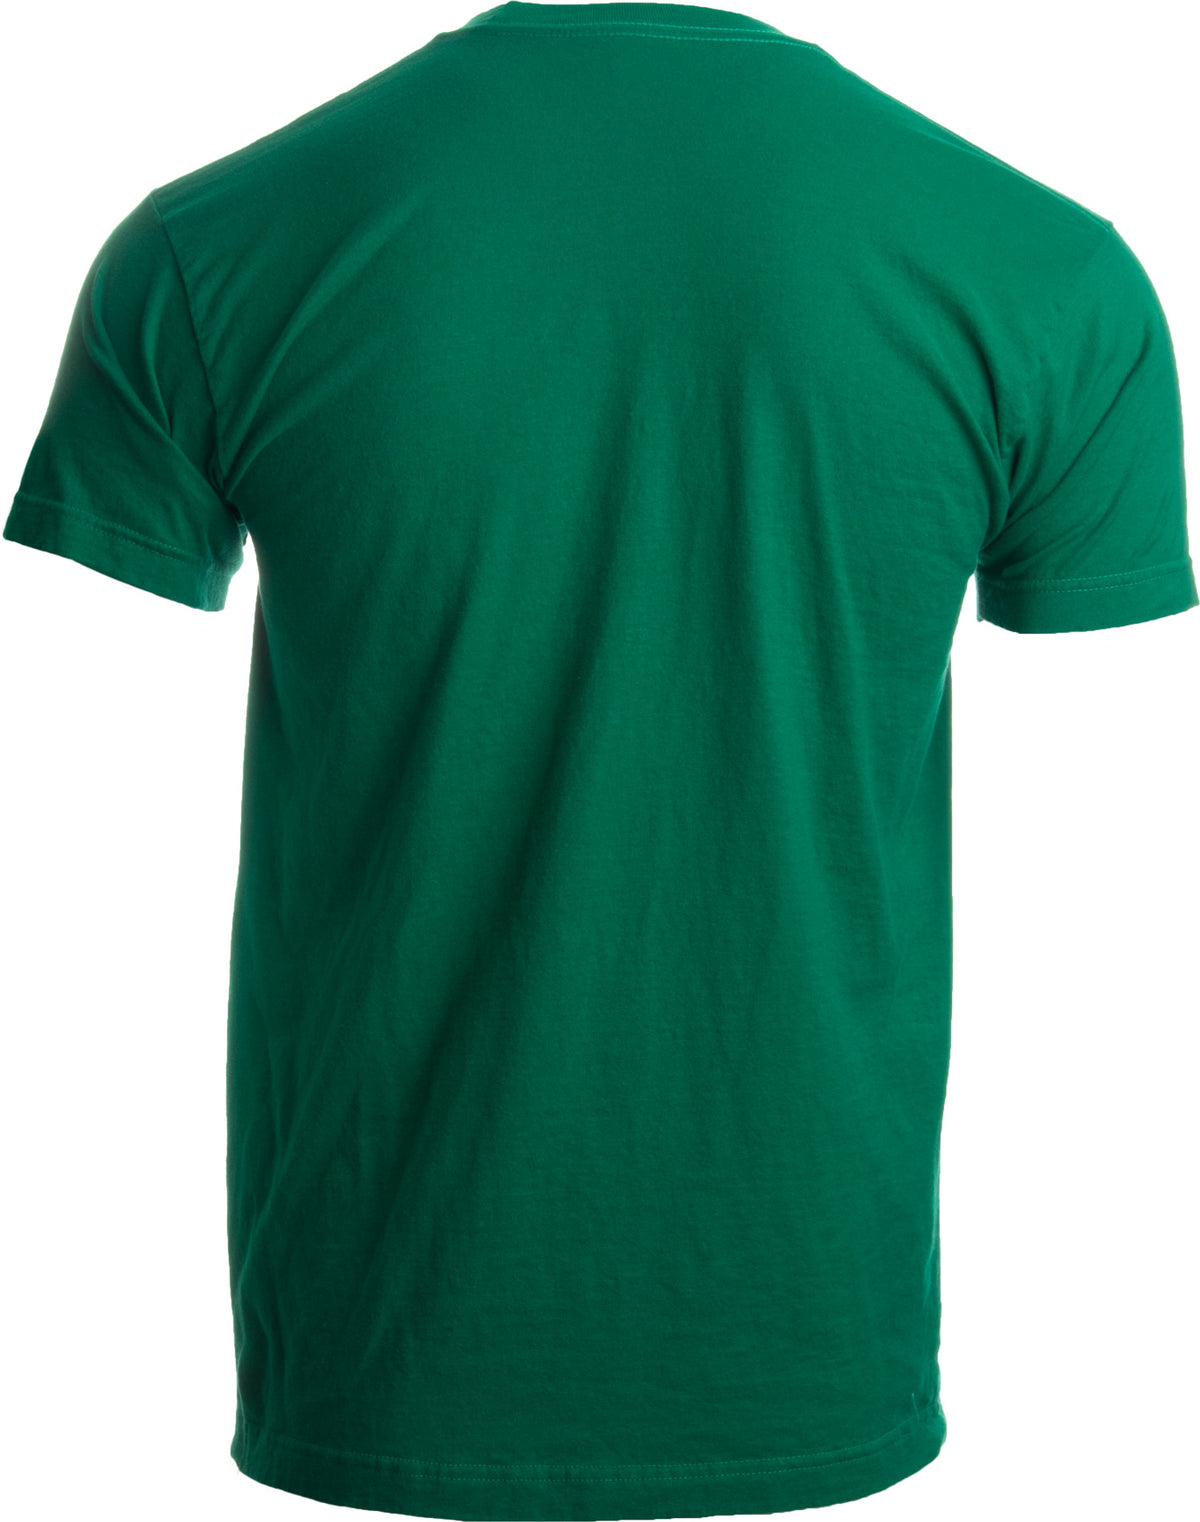 Go Home Snakes, You're Drunk | Funny St. Patrick Paddy's Day Irish Pride T-shirt